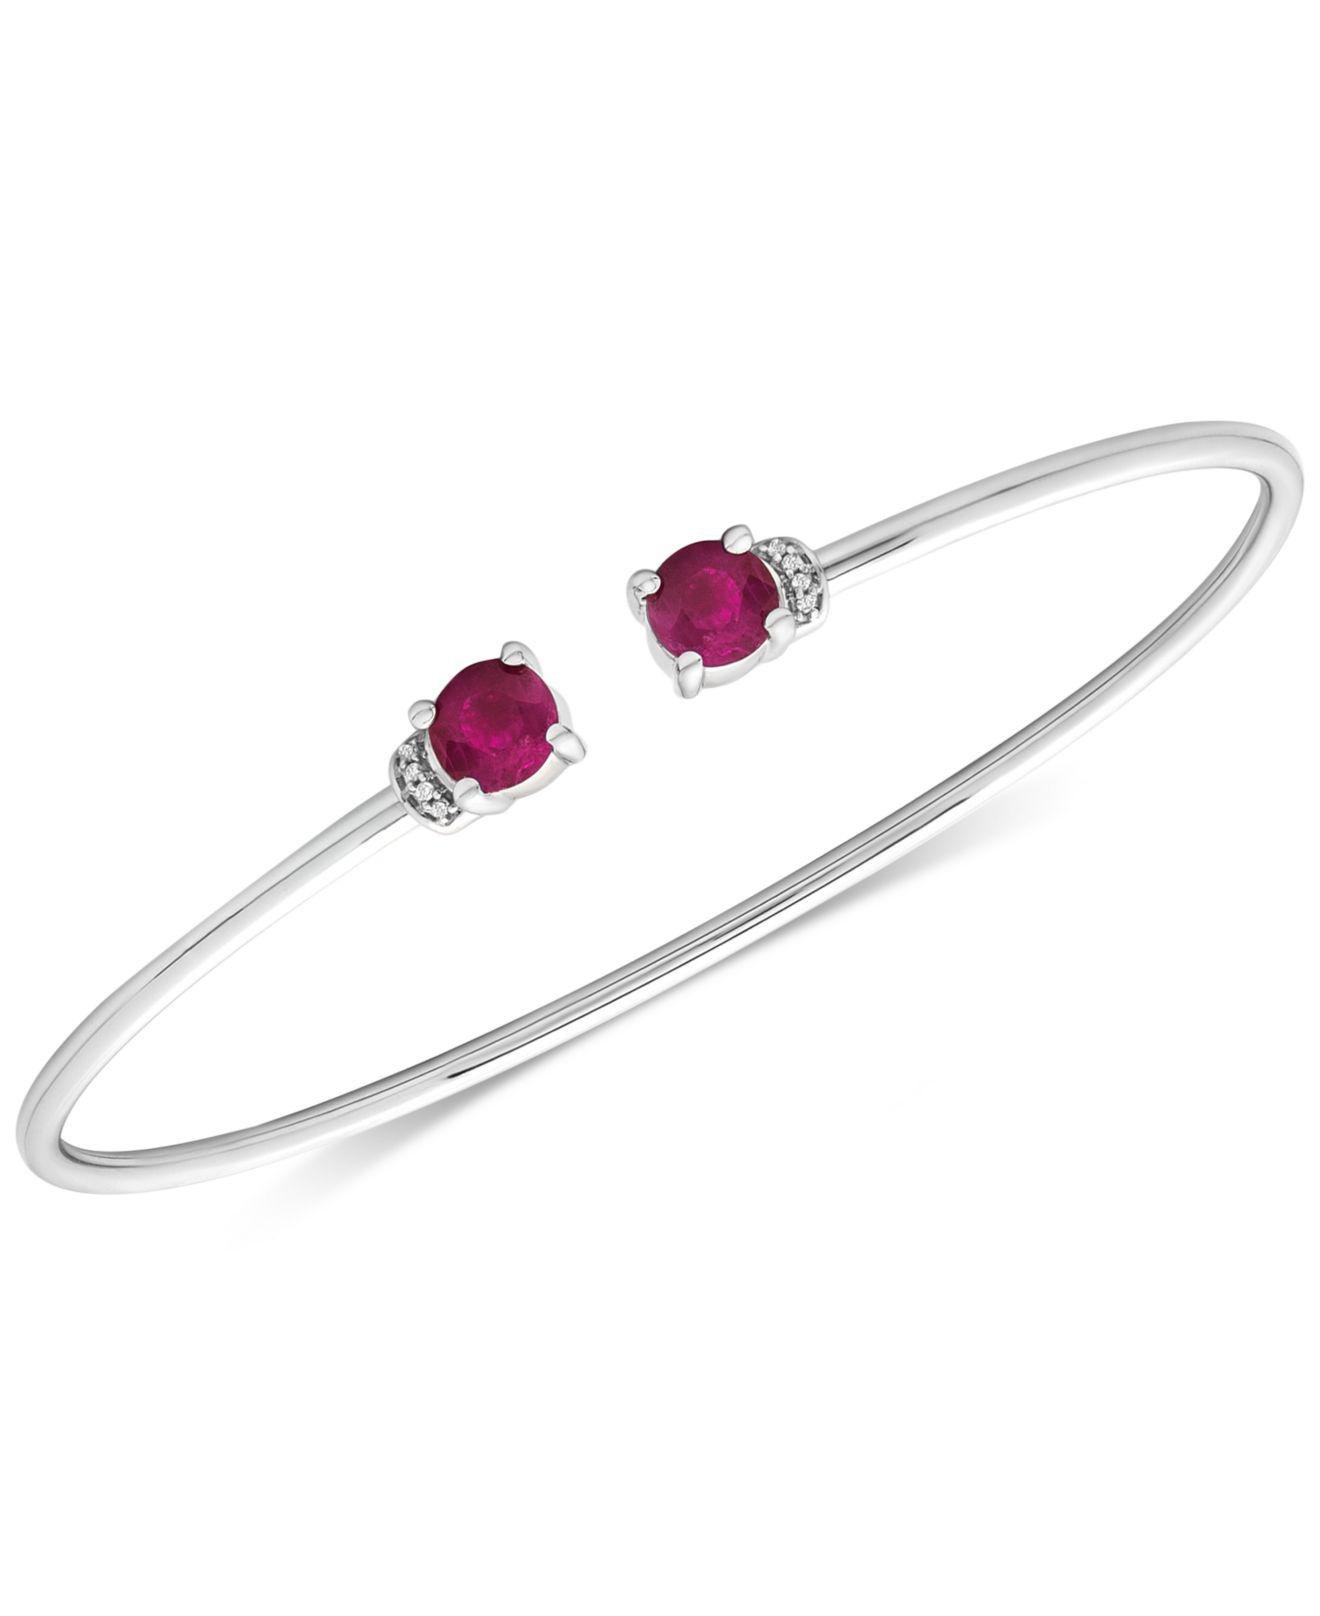 Ruby 1 1 3 Ct T W And Diamond Accent Cuff Bangle Bracelet In 14k White Gold